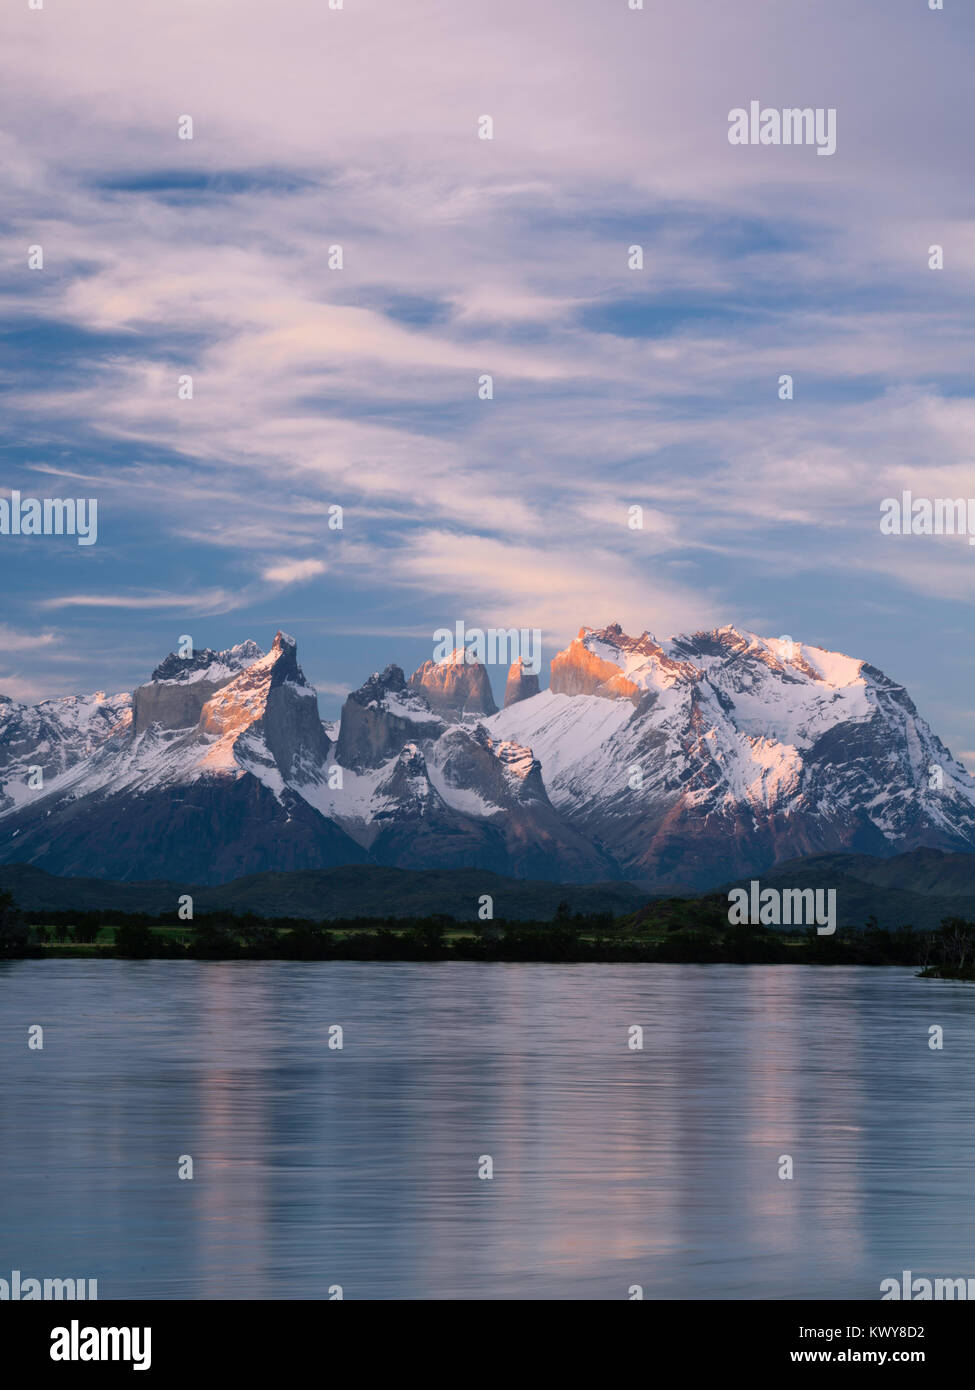 Sunset view of Torres del Paine National Park over Rio Serrano, Tyndall, Chile. Stock Photo